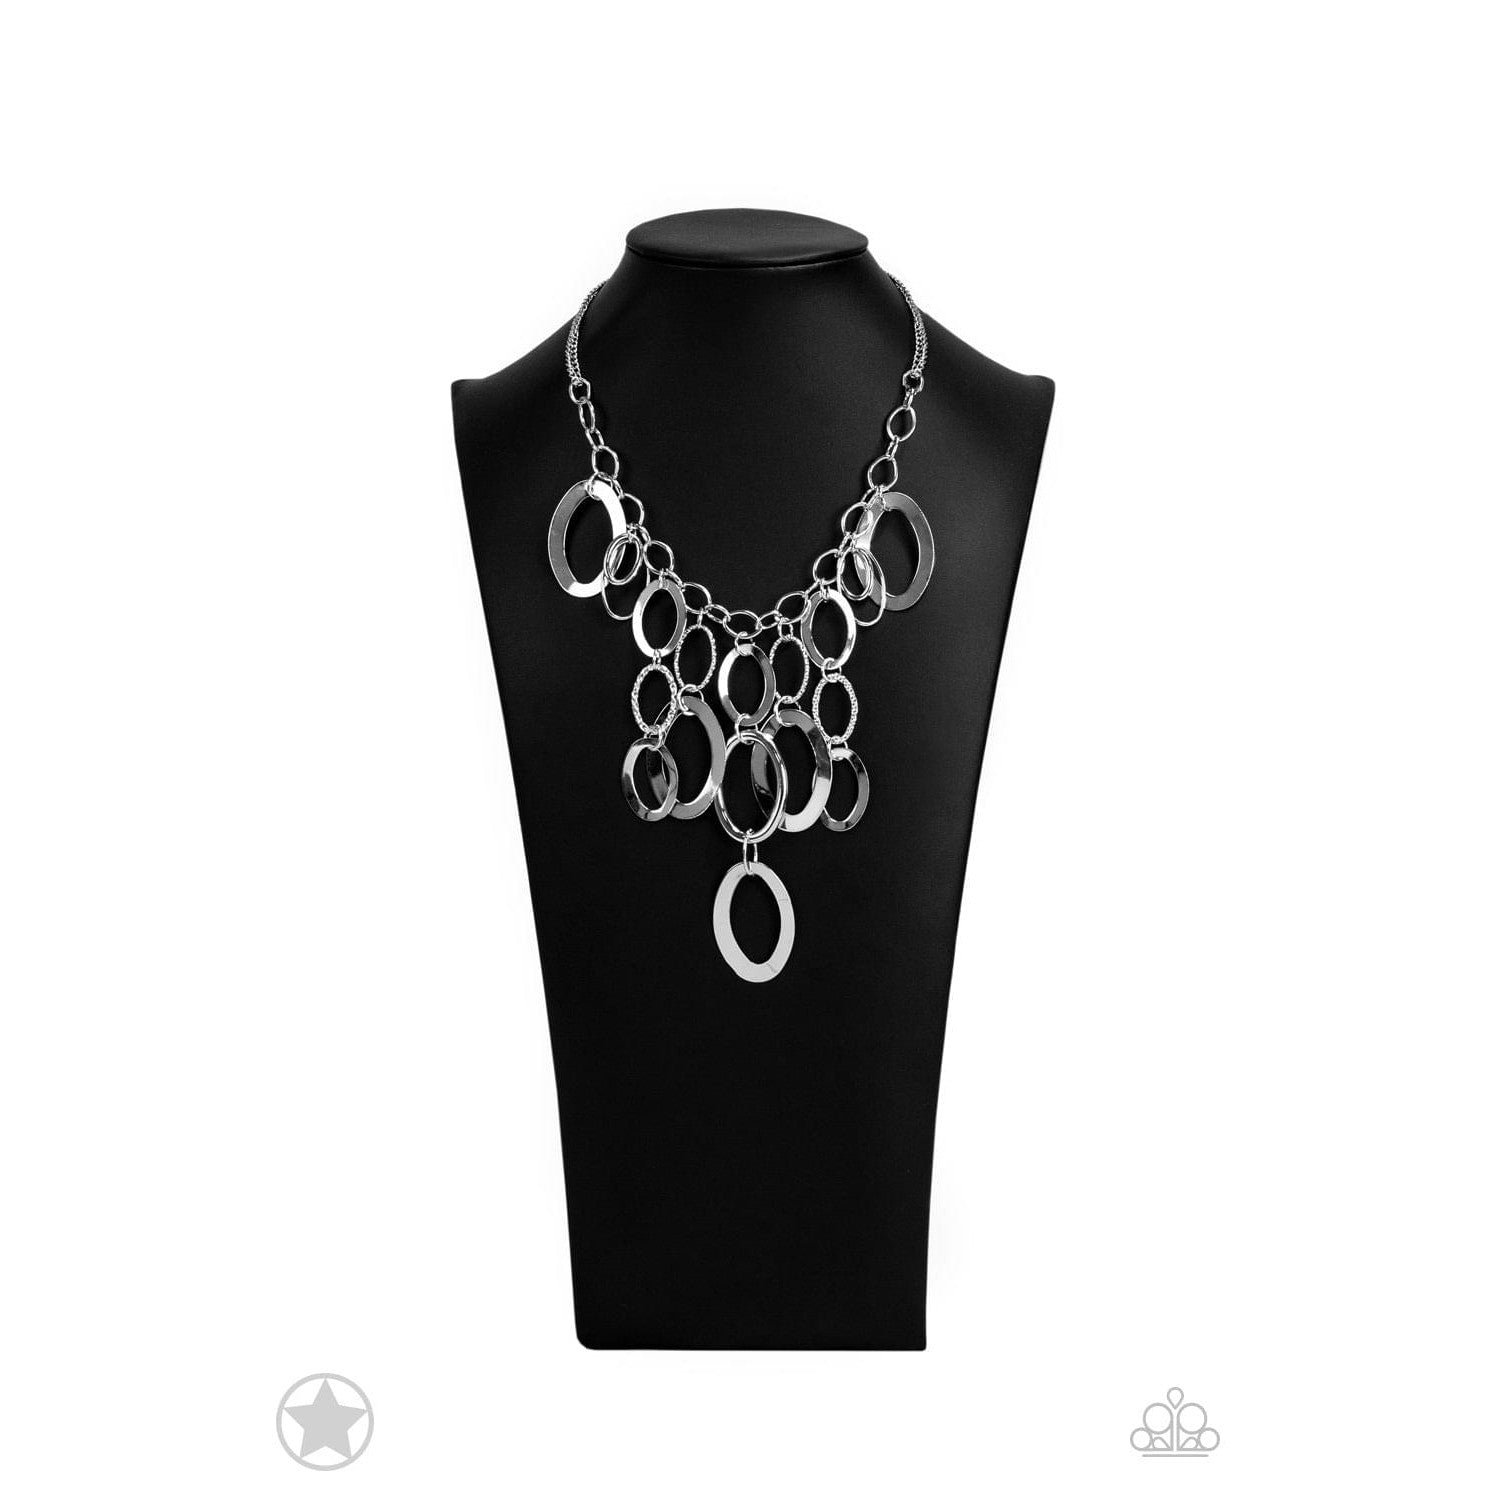 A Silver Spell - Silver Blockbuster Necklace - A Large Selection Hand-Chains And Jewelry On rainbowartsreview,Women's Jewelry | Necklaces, Earrings, Bracelets